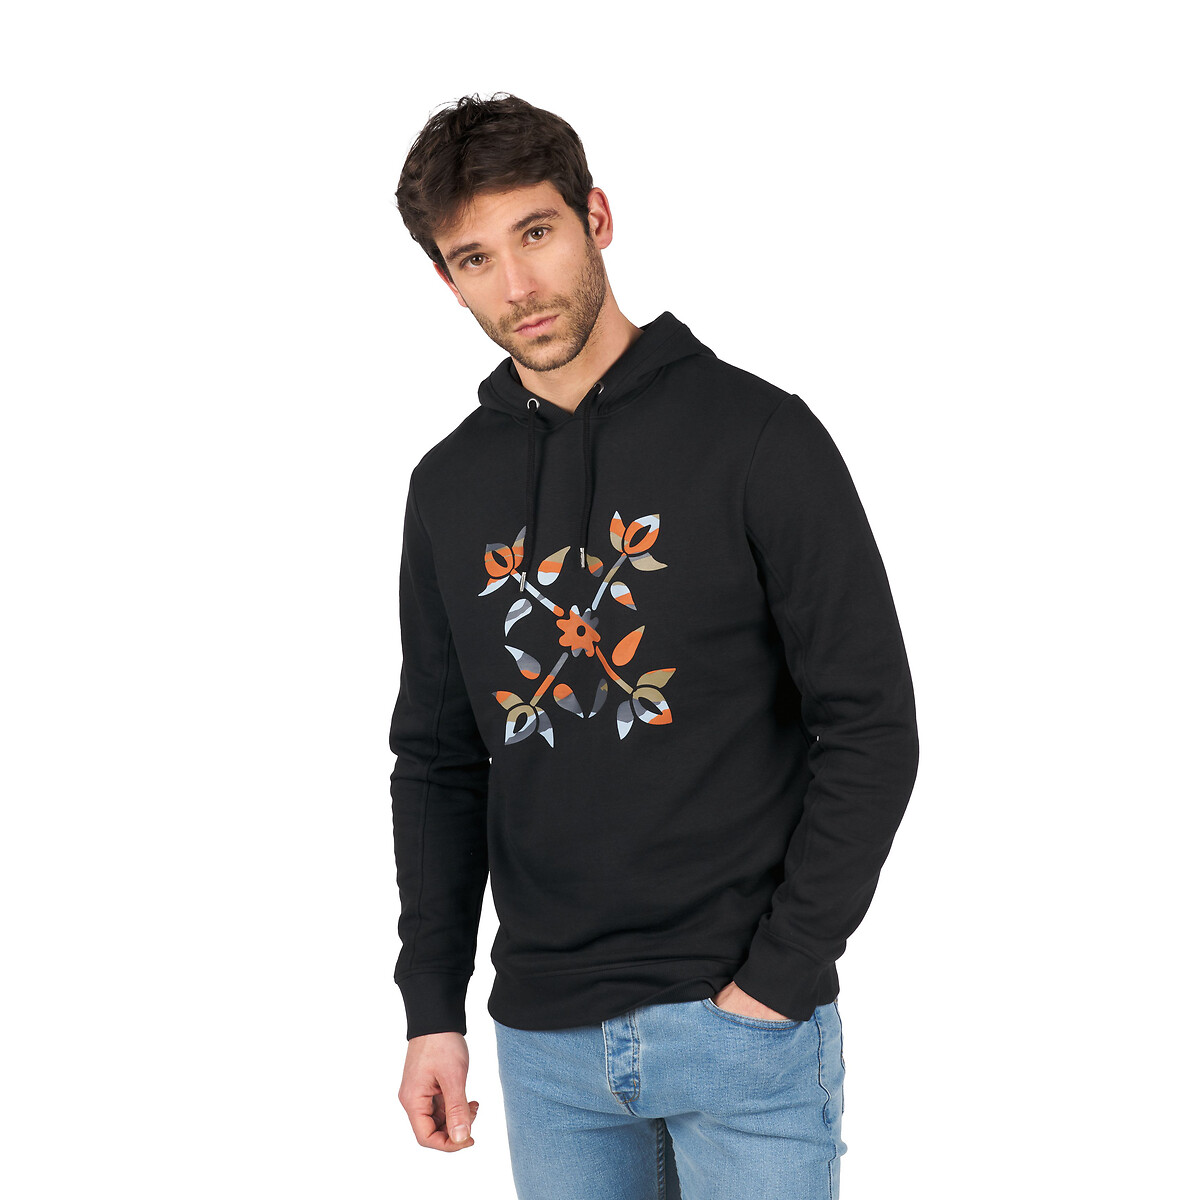 Oxbow N1skol Sweat col Rond Homme